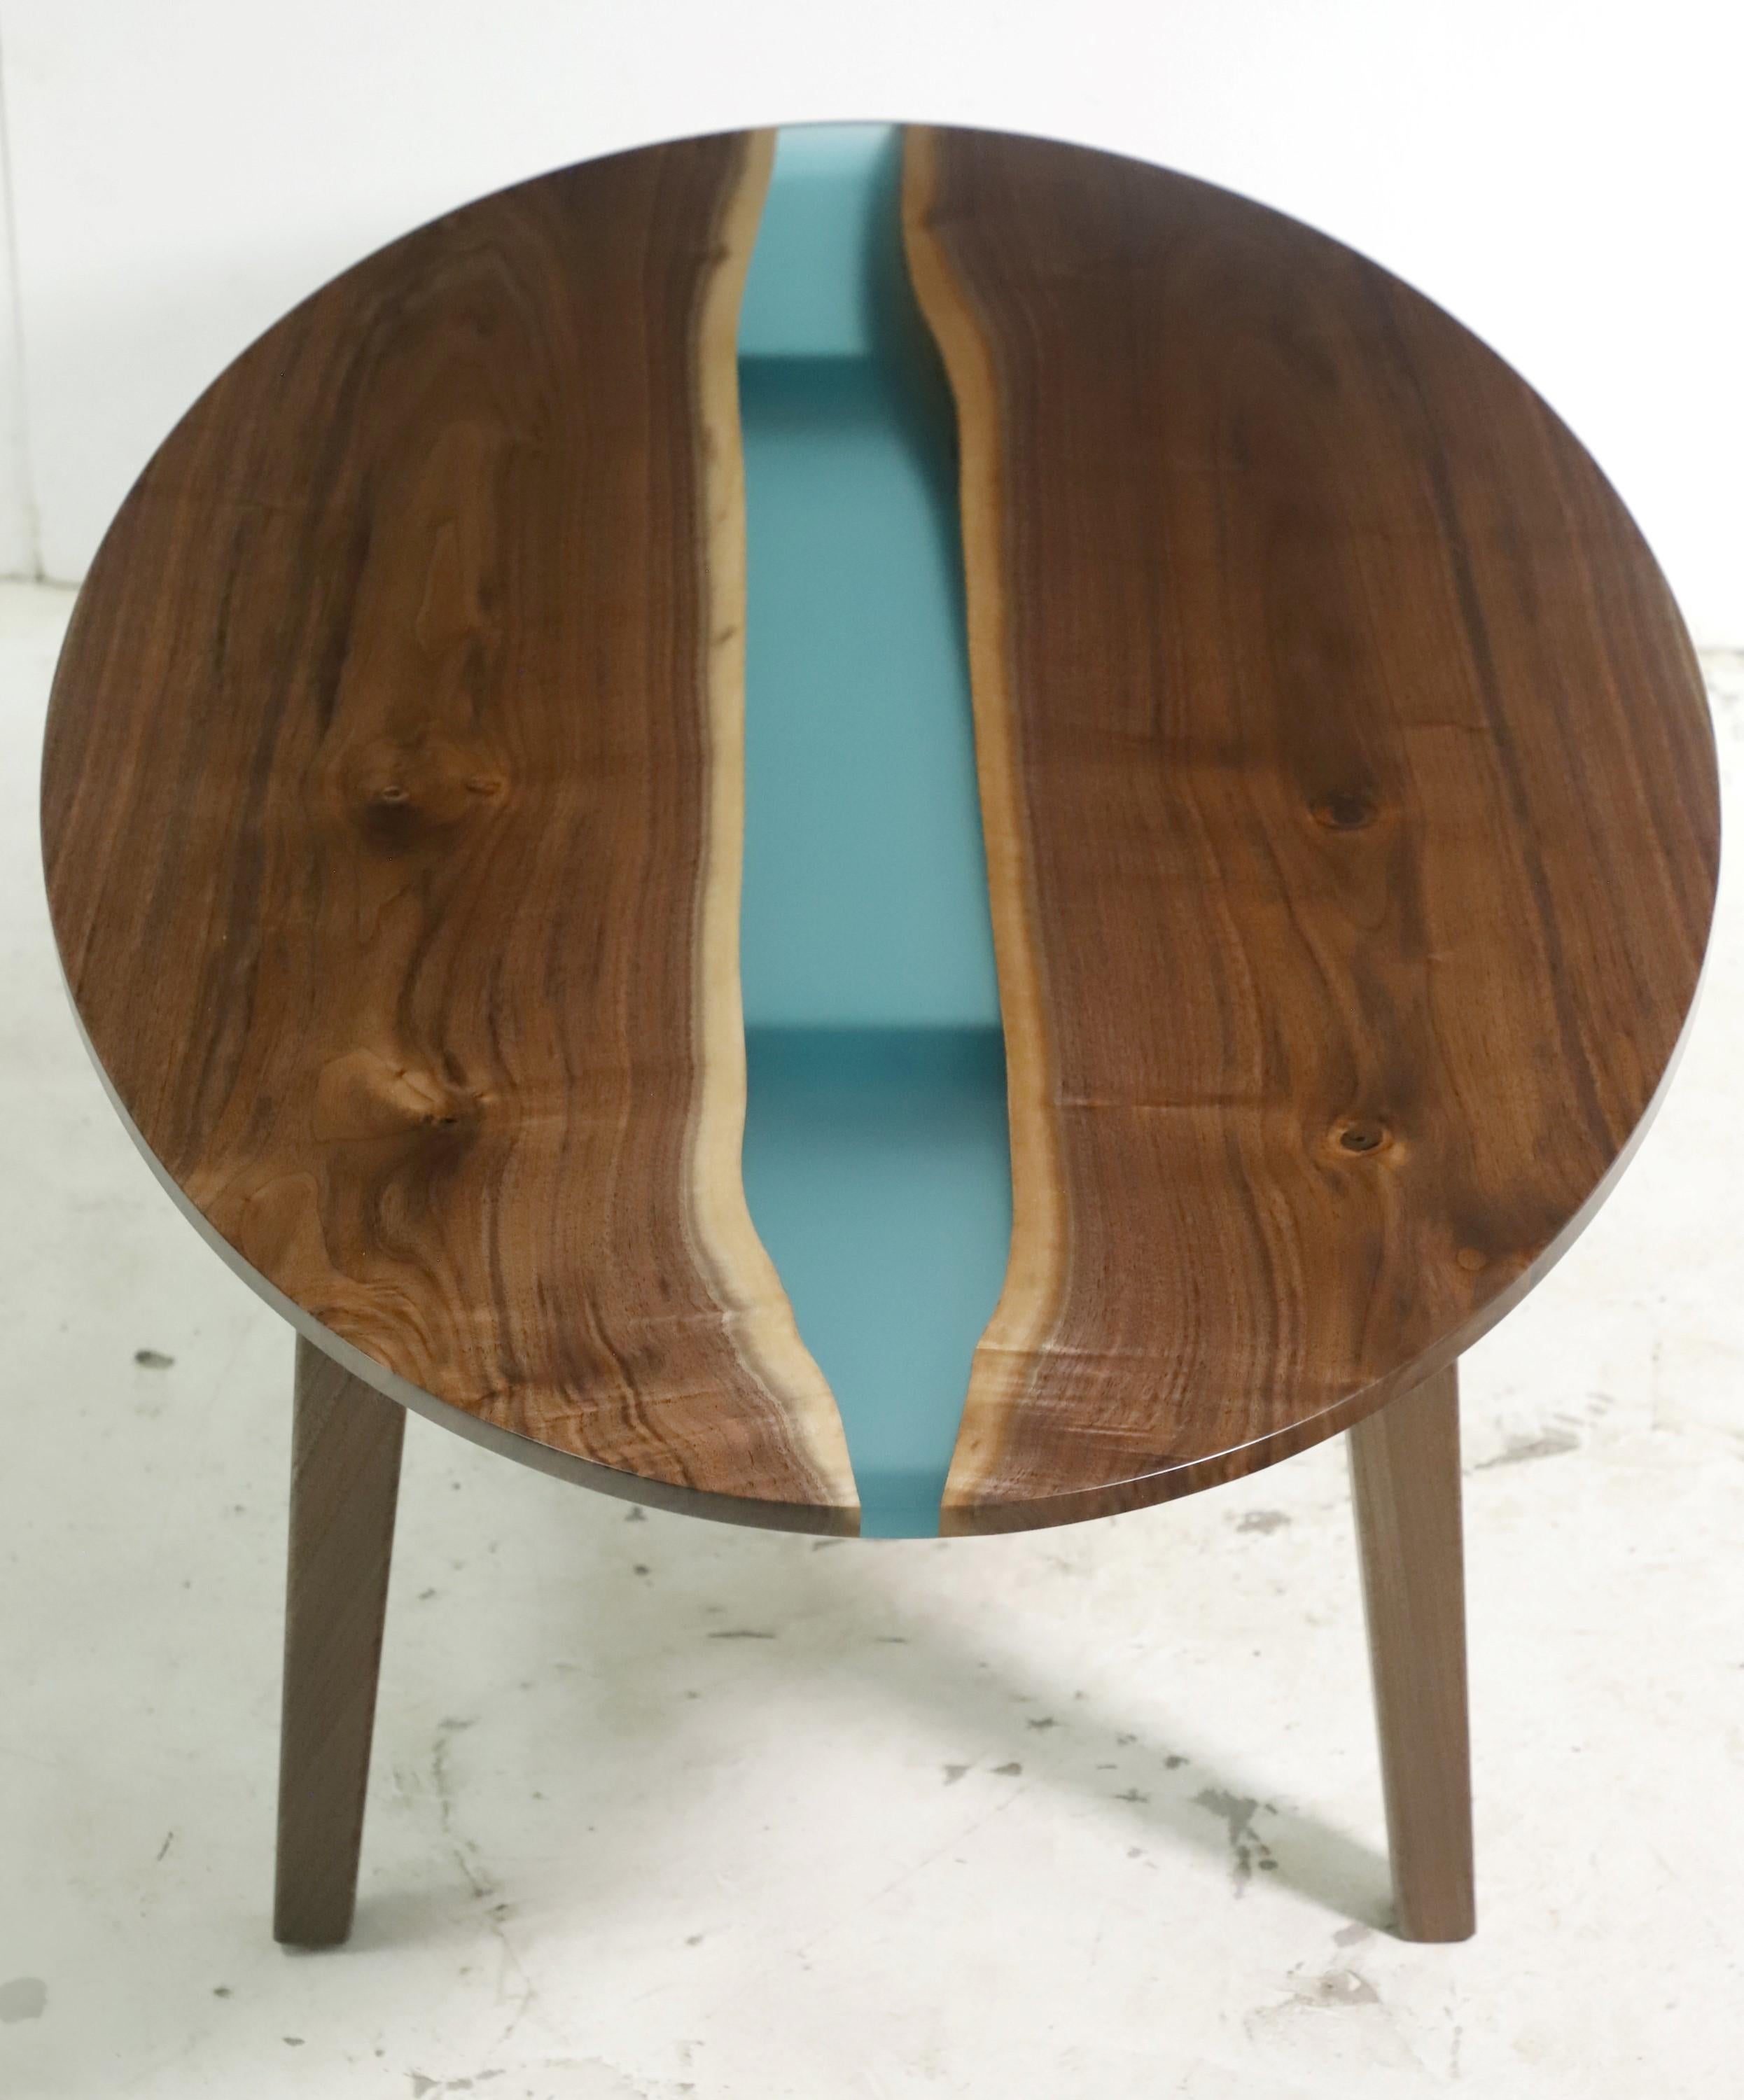 This table features a two slab solid walnut top with a blue green center resin detail pour paired with tapered legs. This table is ready to ship. Please note, this item is located in our Scranton, PA location.